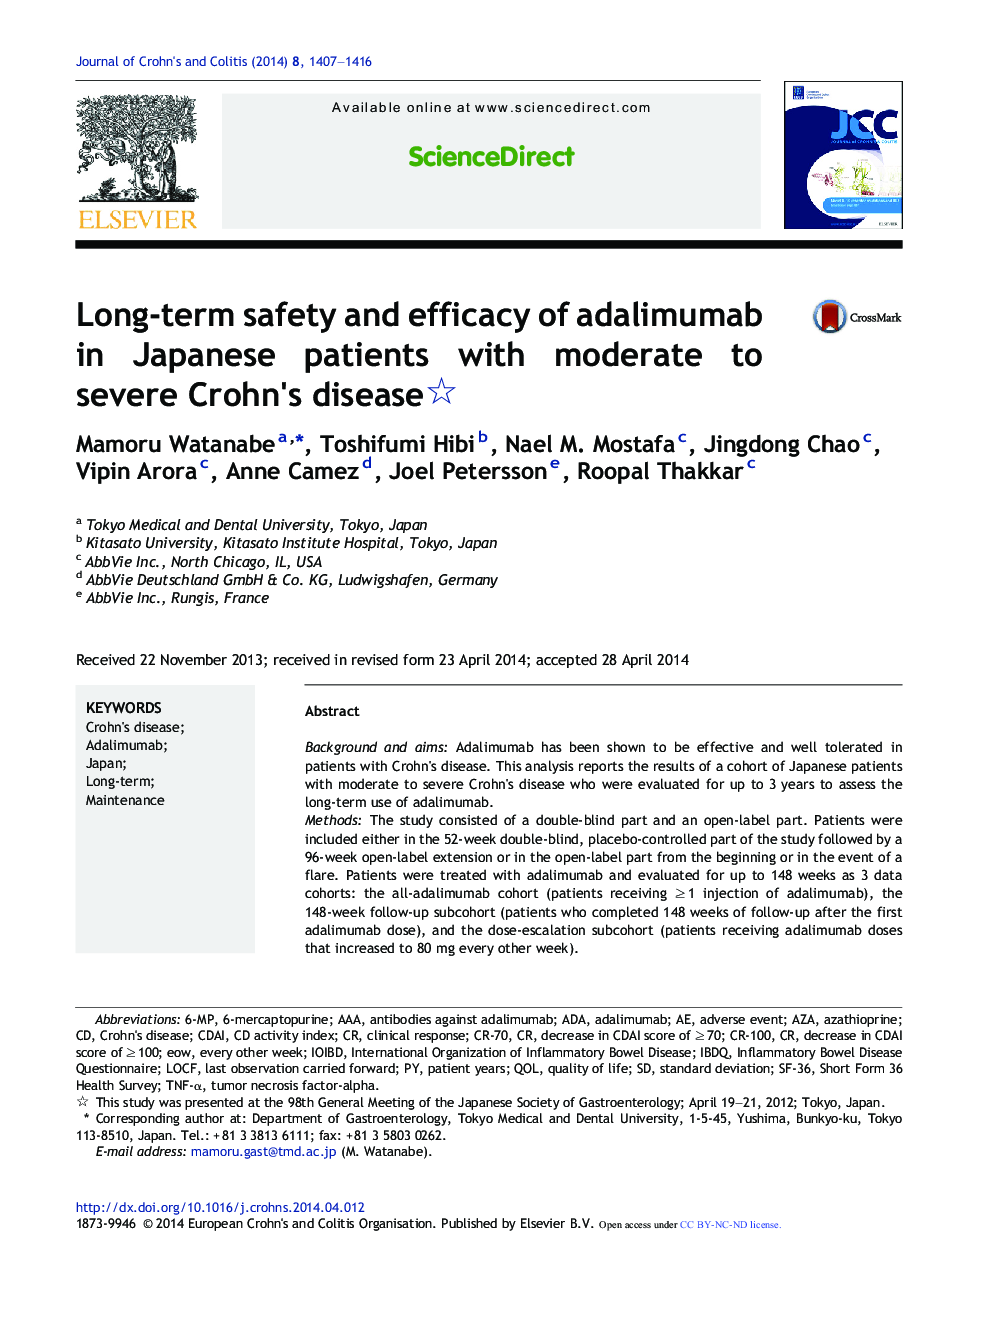 Long-term safety and efficacy of adalimumab in Japanese patients with moderate to severe Crohn's disease